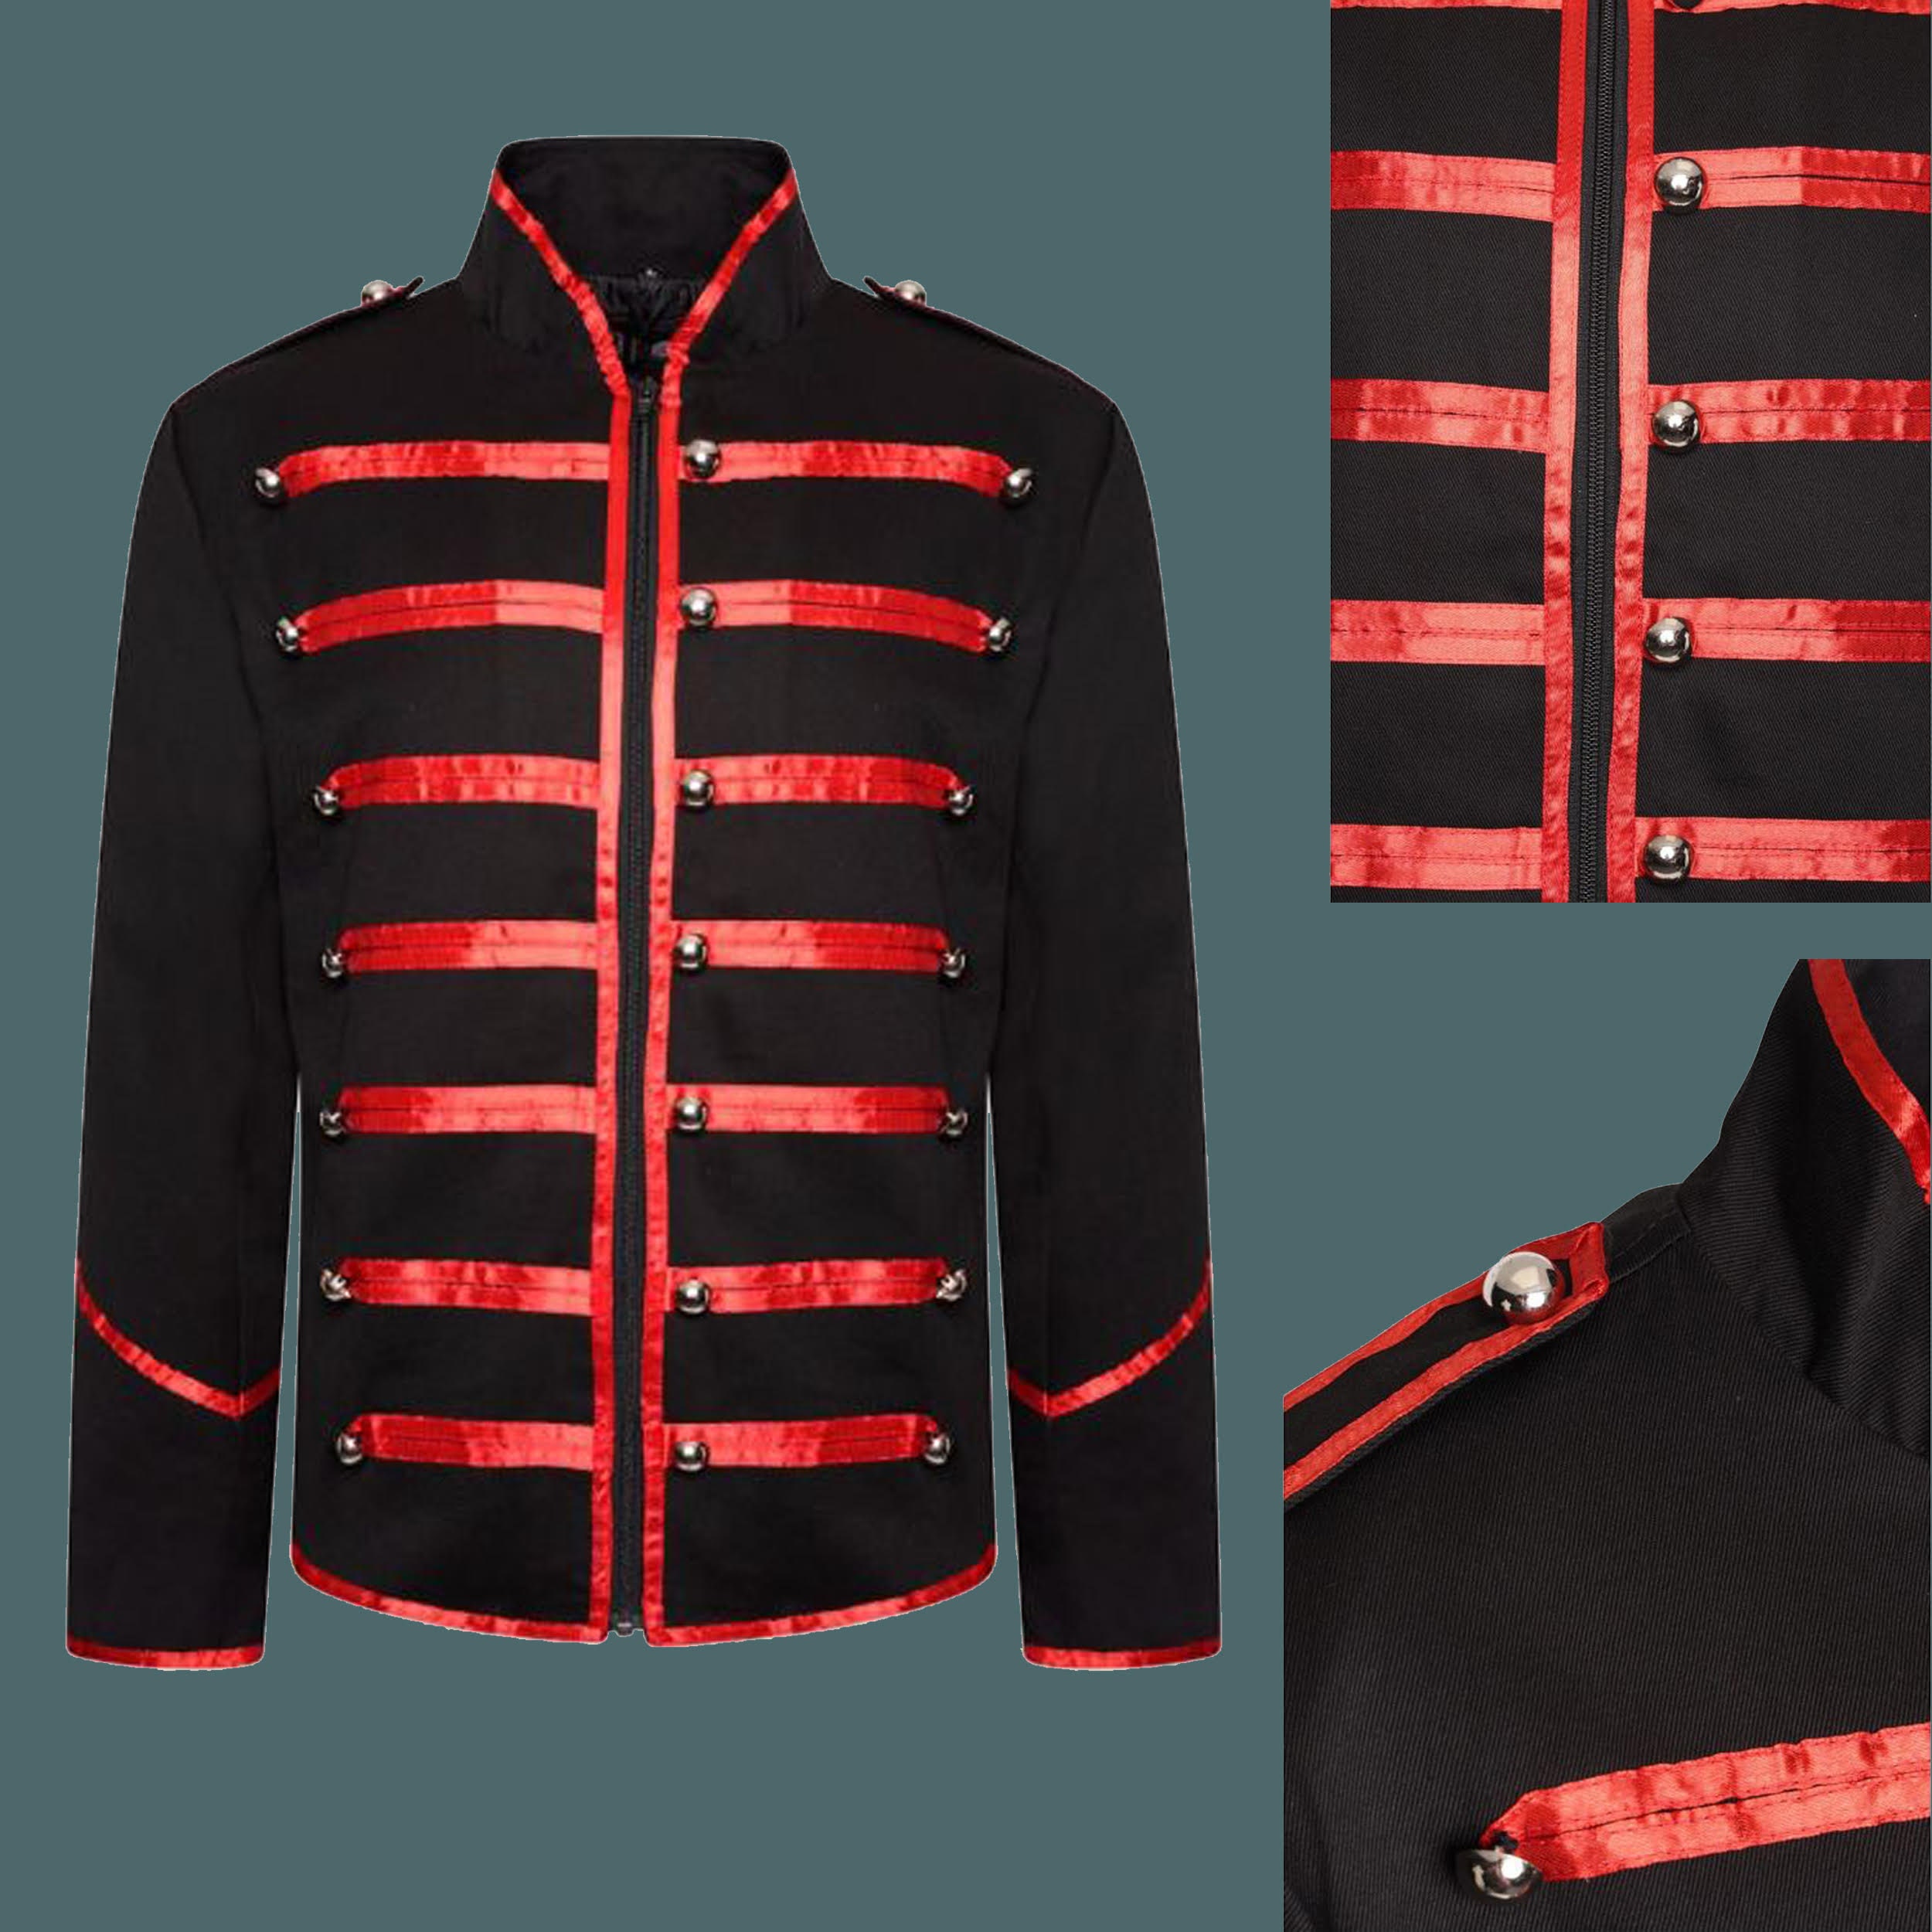 Gothic Military Band Jacket for Men - Bold Fashion with a Vintage Twist